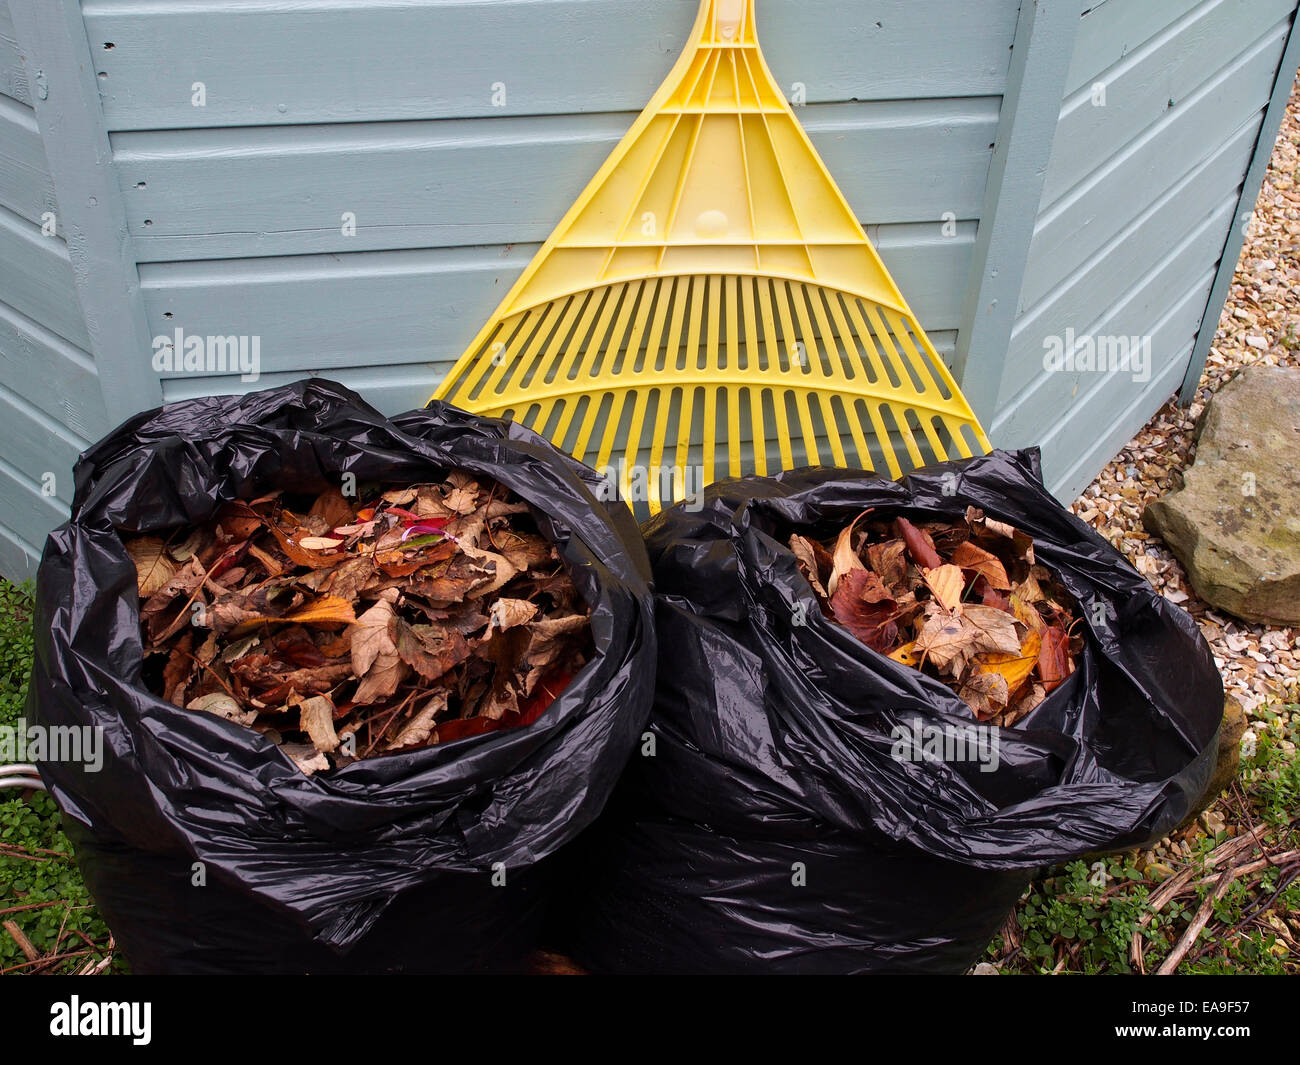 Black plastic bags filled with dead autumn leaves, which will decompose in the bag forming leaf mould a useful garden fertiliser Stock Photo